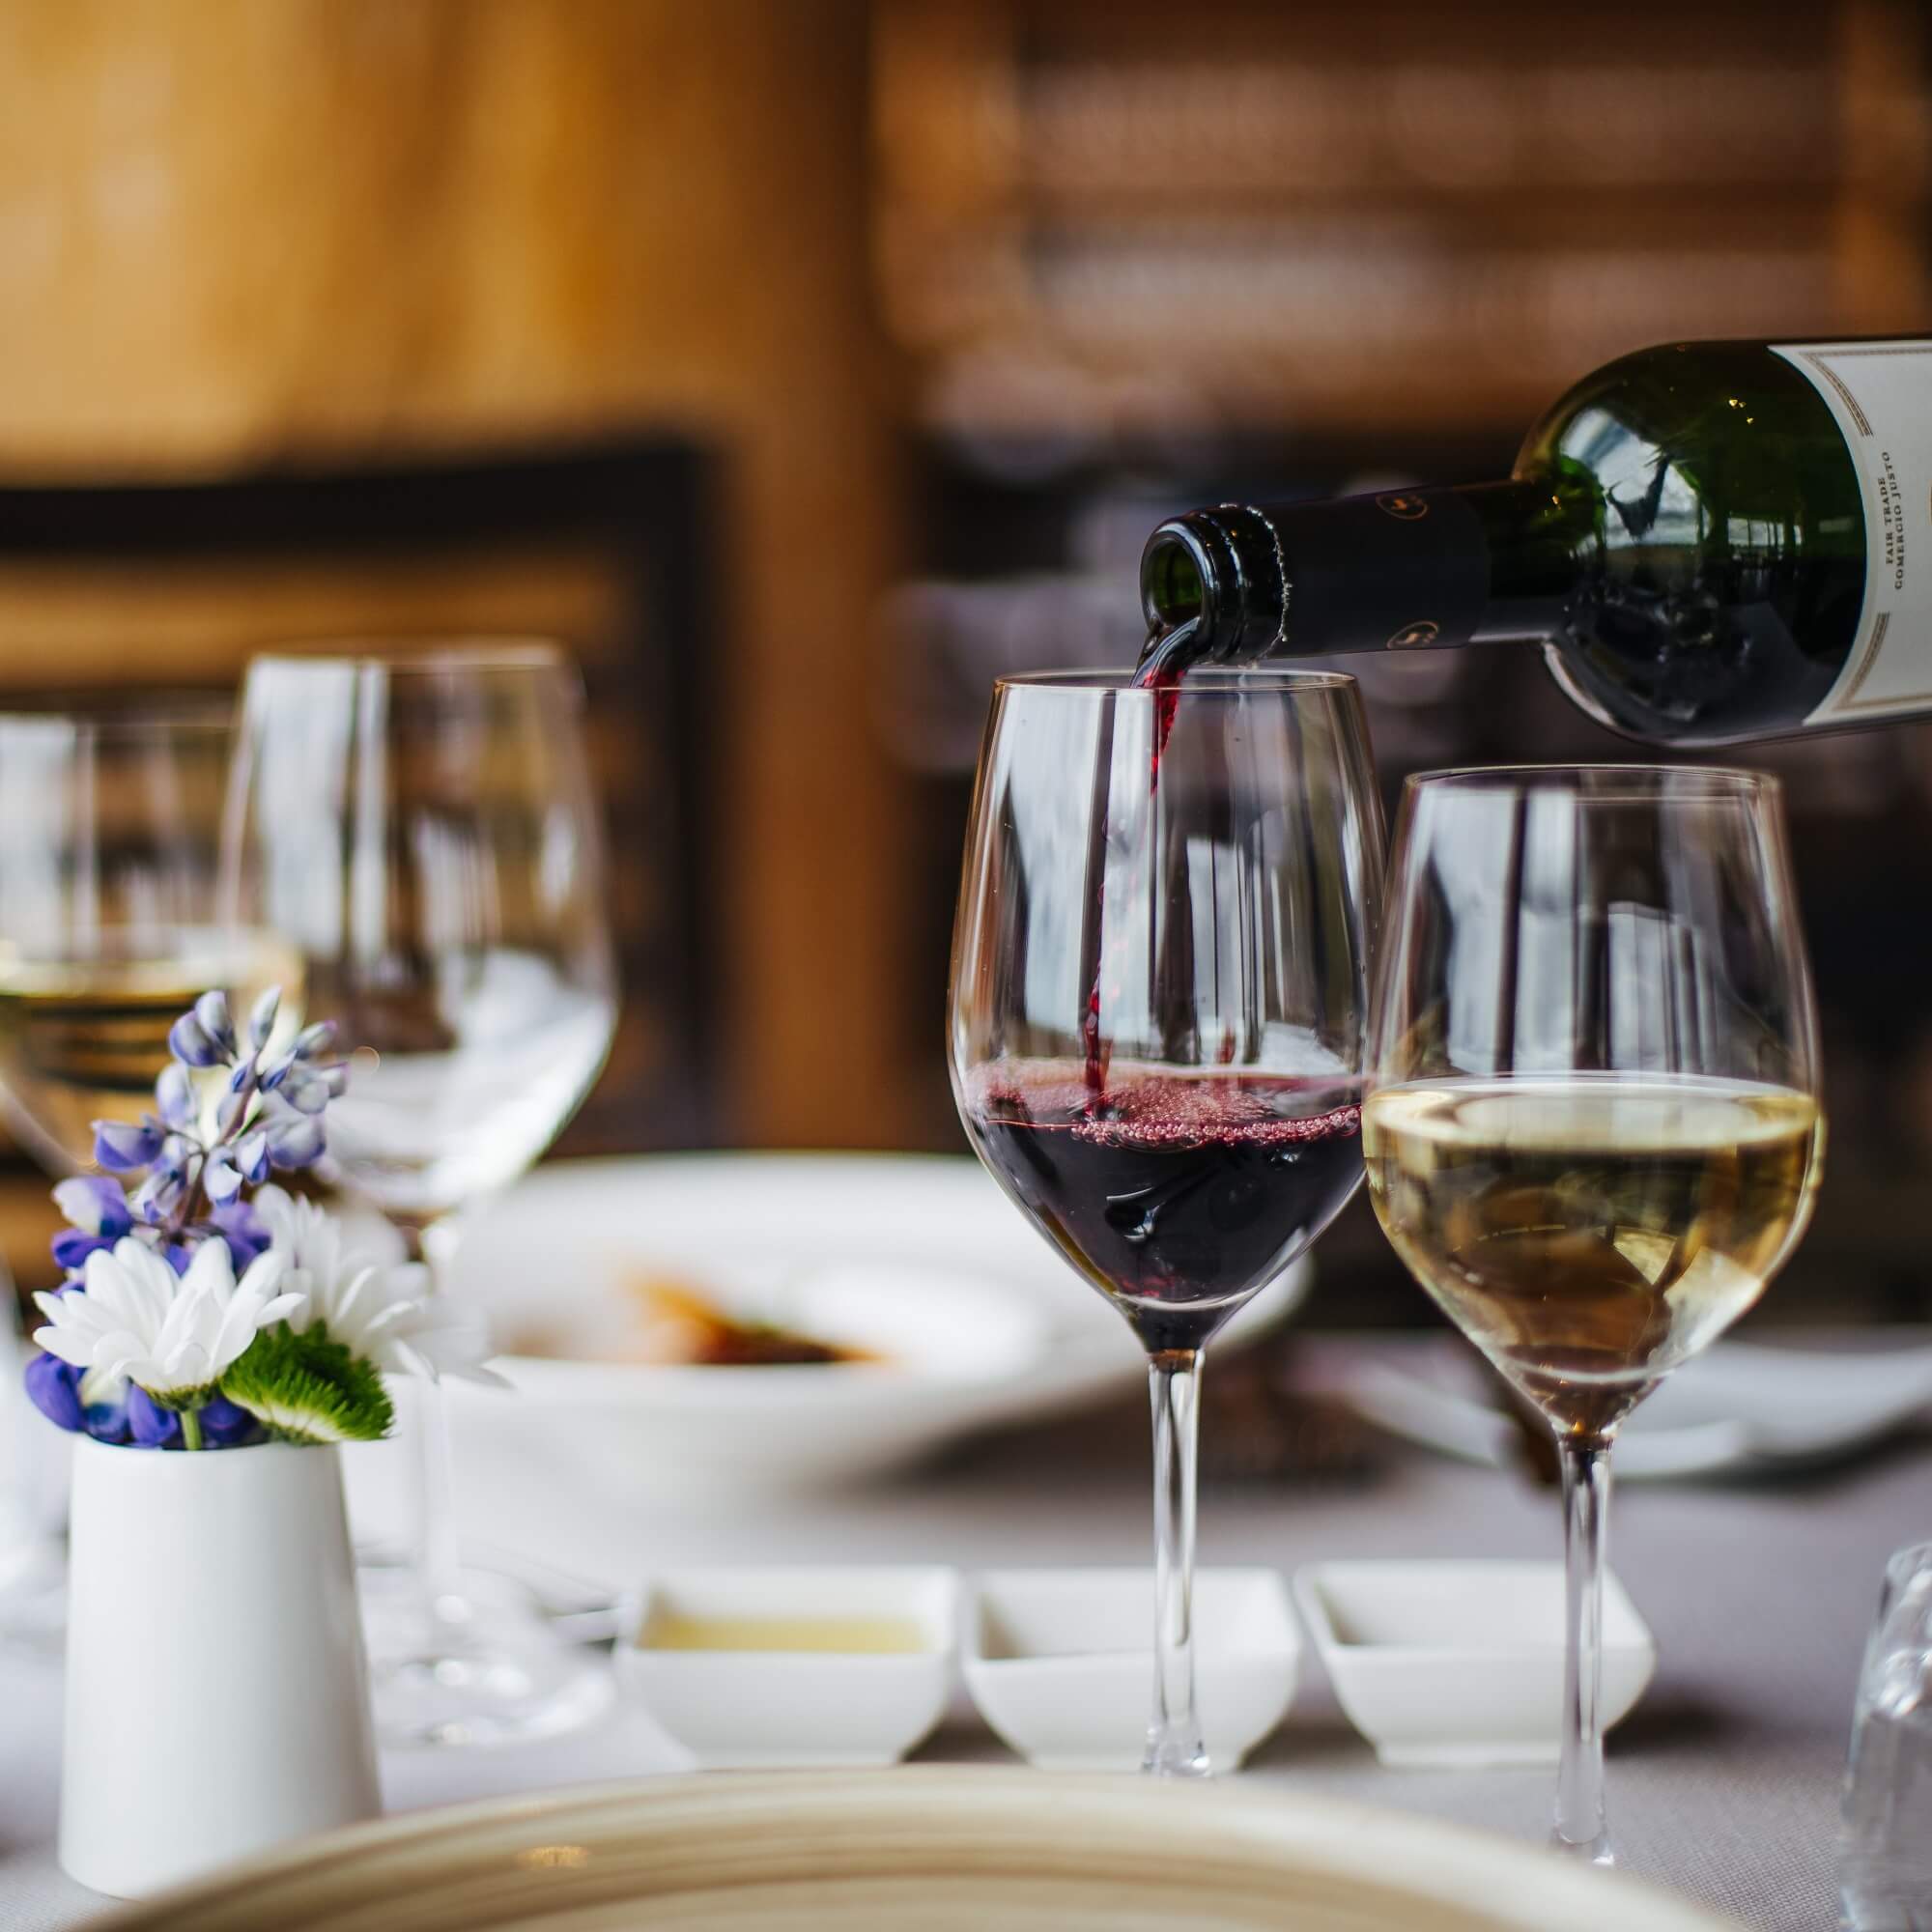 A glass of red and white wine beside a vase of lupine at the luxury Rangá Restaurant.